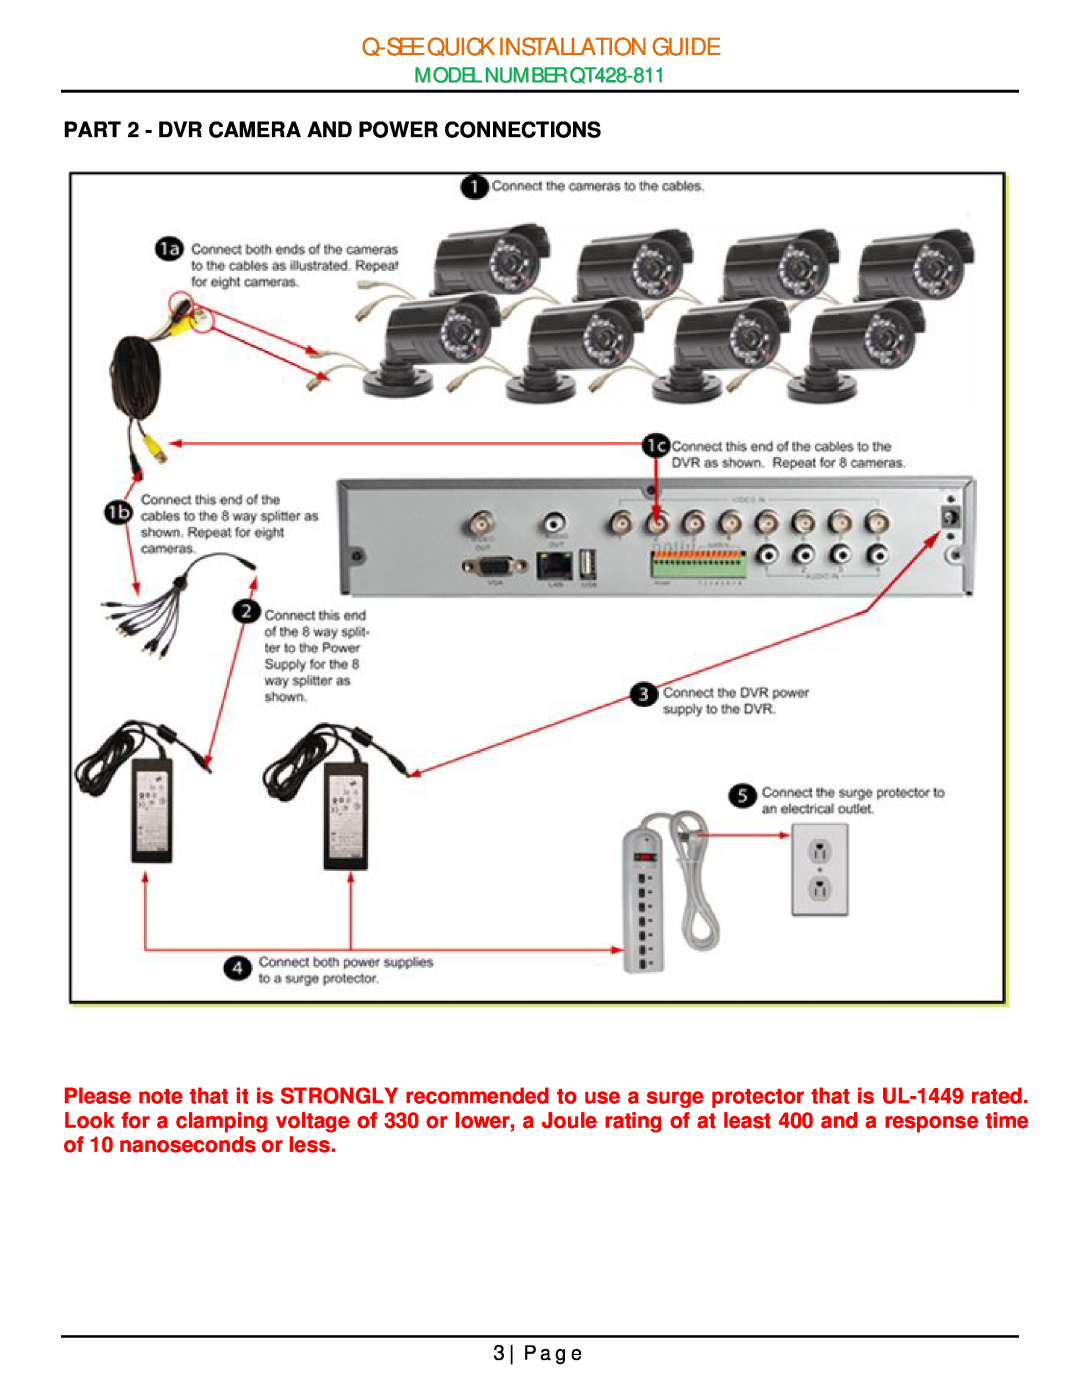 Q-See manual PART 2 - DVR CAMERA AND POWER CONNECTIONS, P a g e, Q-See Quick Installation Guide, MODEL NUMBER QT428-811 